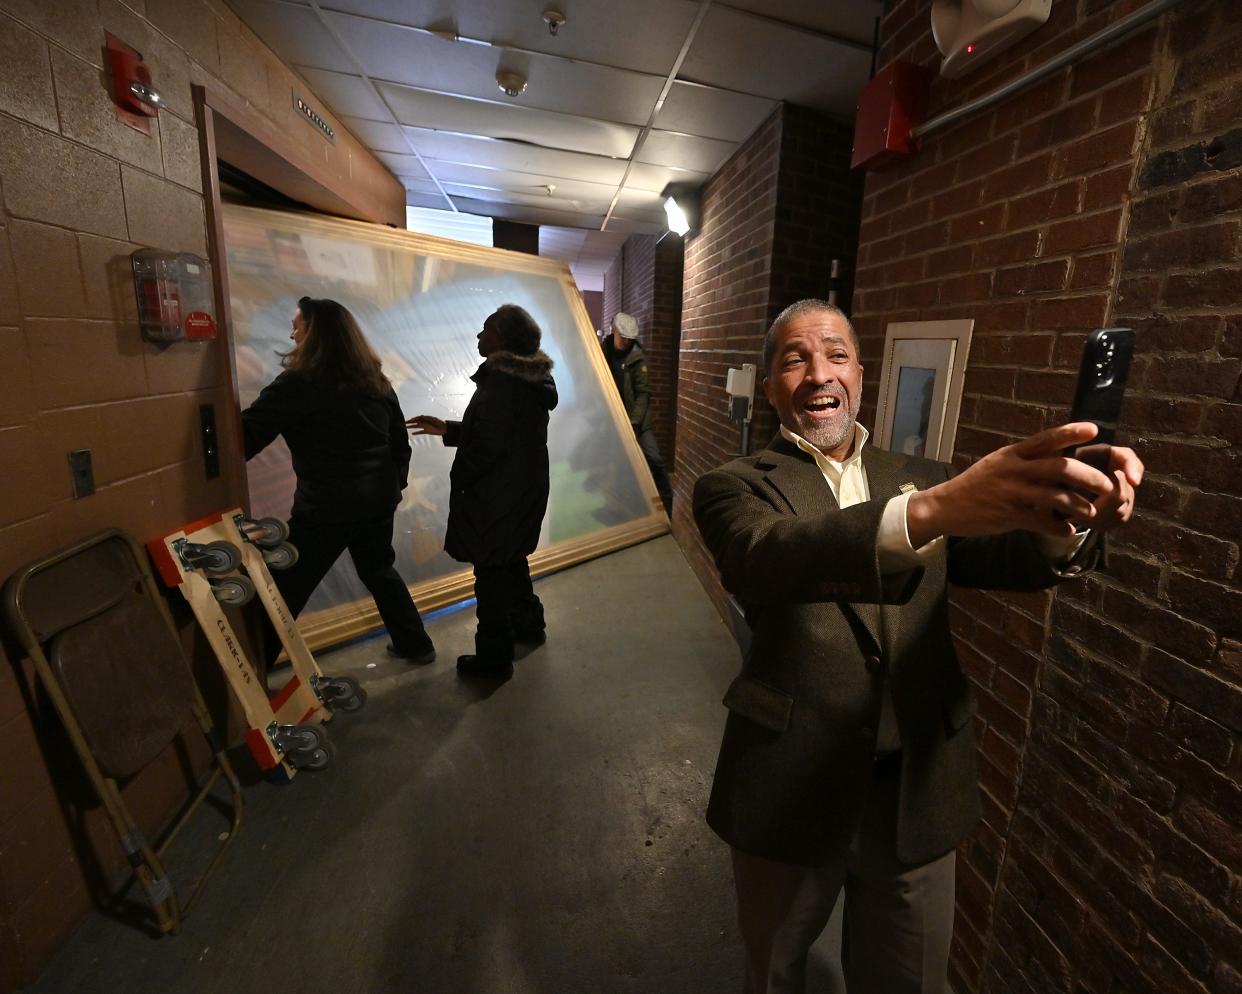 James Goldsberry — a descendant of 19th century Black Worcester business owners and abolitionists William Brown and Martha Brown — takes a selfie as workers struggle to load their approximately 11-by-8 foot portrait onto a freight elevator at Mechanics Hall. The workers ended up carrying the painting through the front doors.